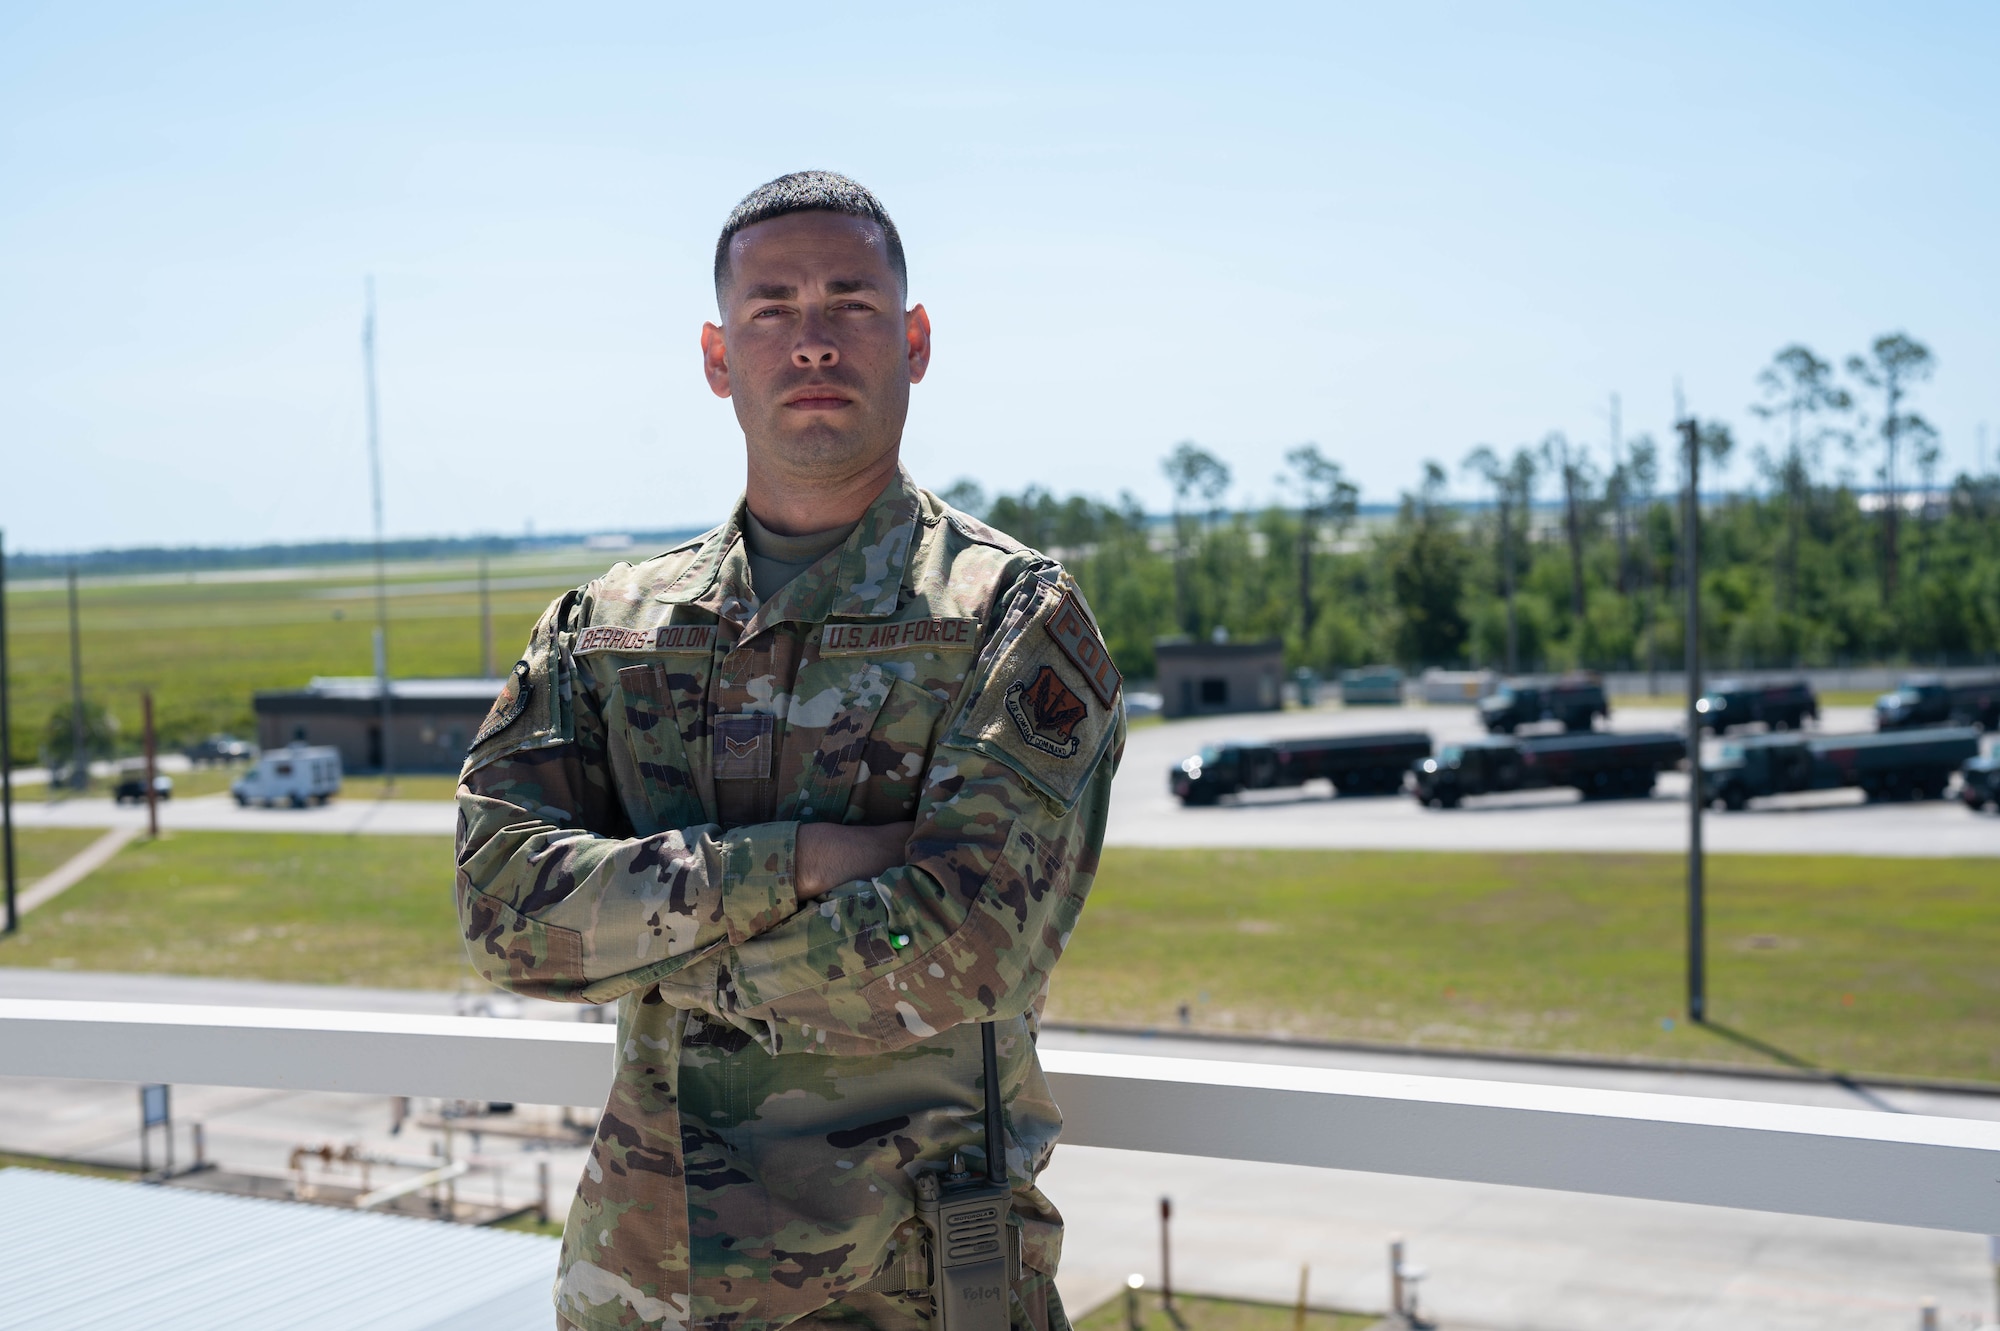 An Airman poses for a photo in front of fuel trucks.